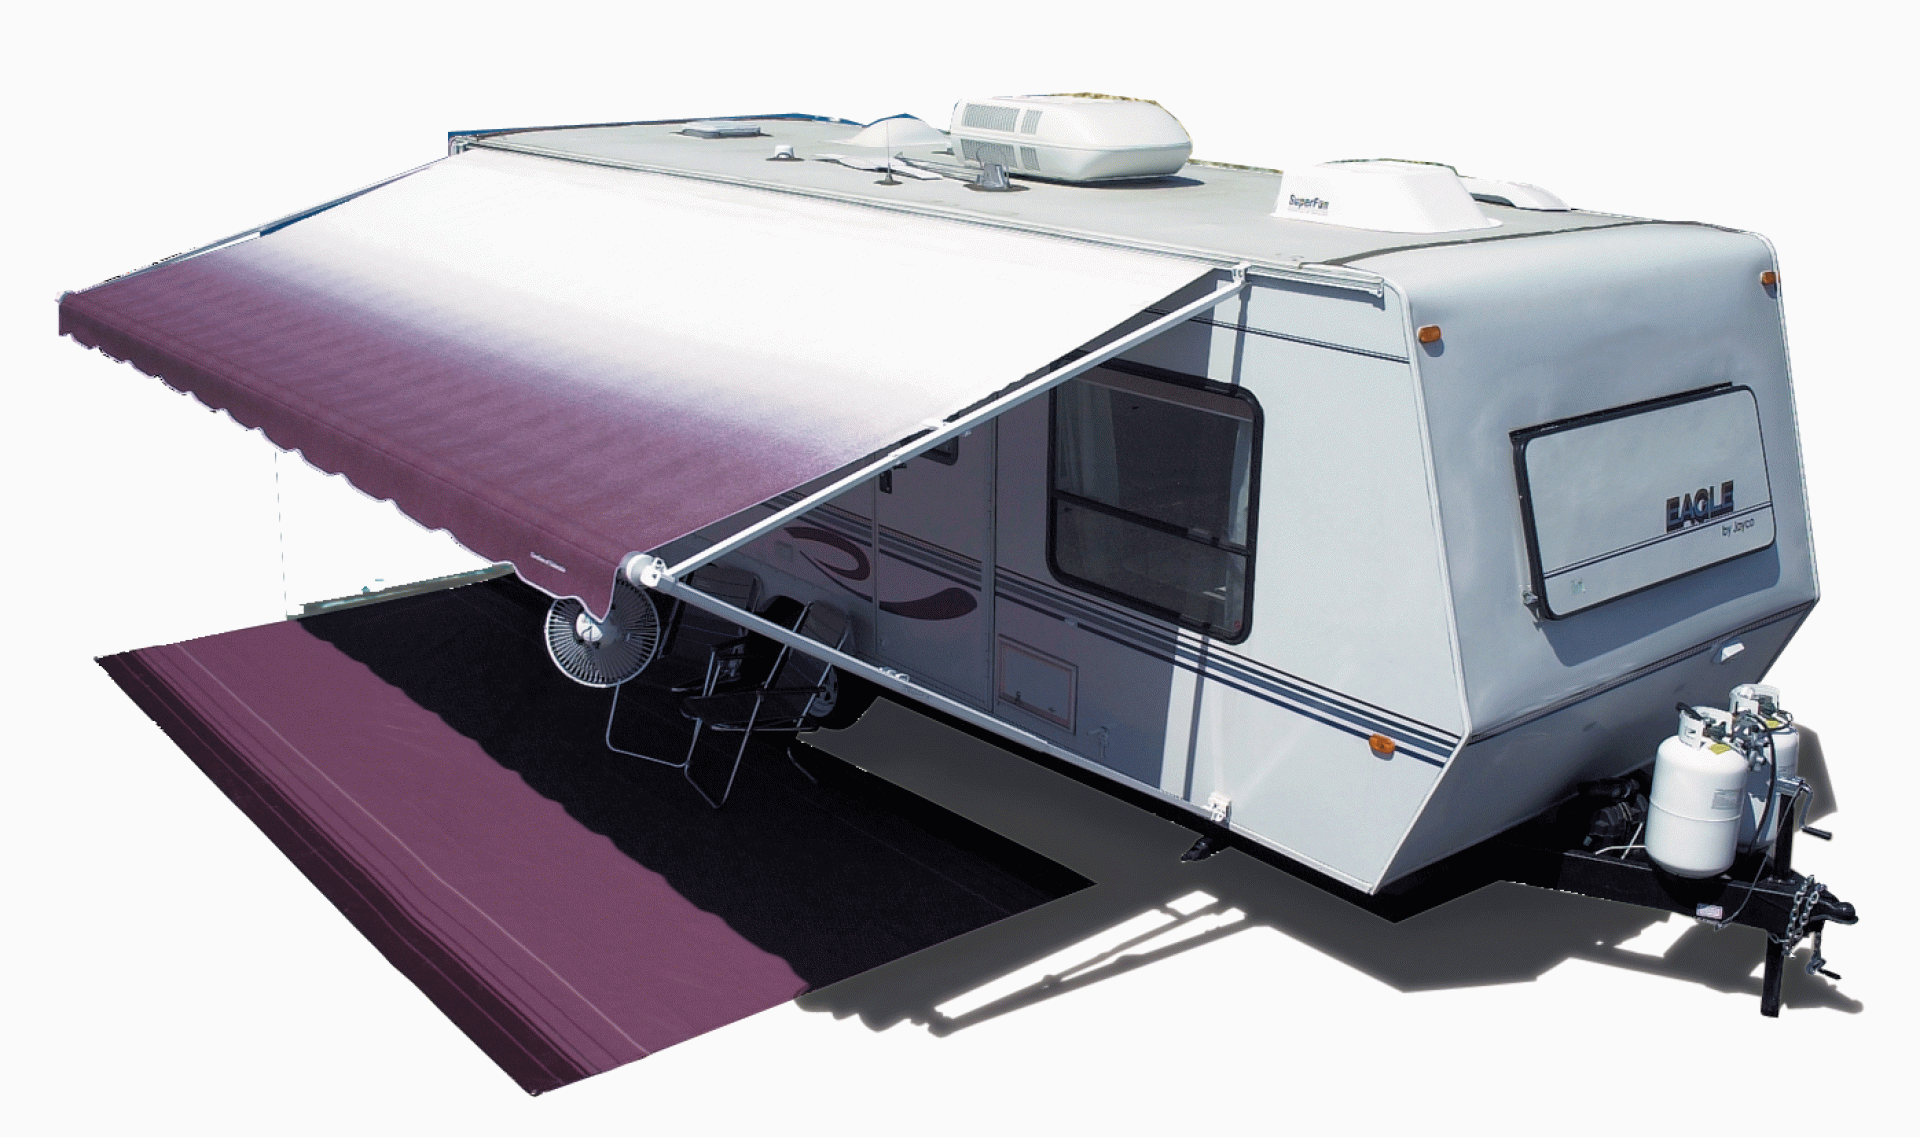 CAREFREE OF COLORADO | EA125500 | FIESTA AWNING 12' BORDEAUX WHITE CASTINGS